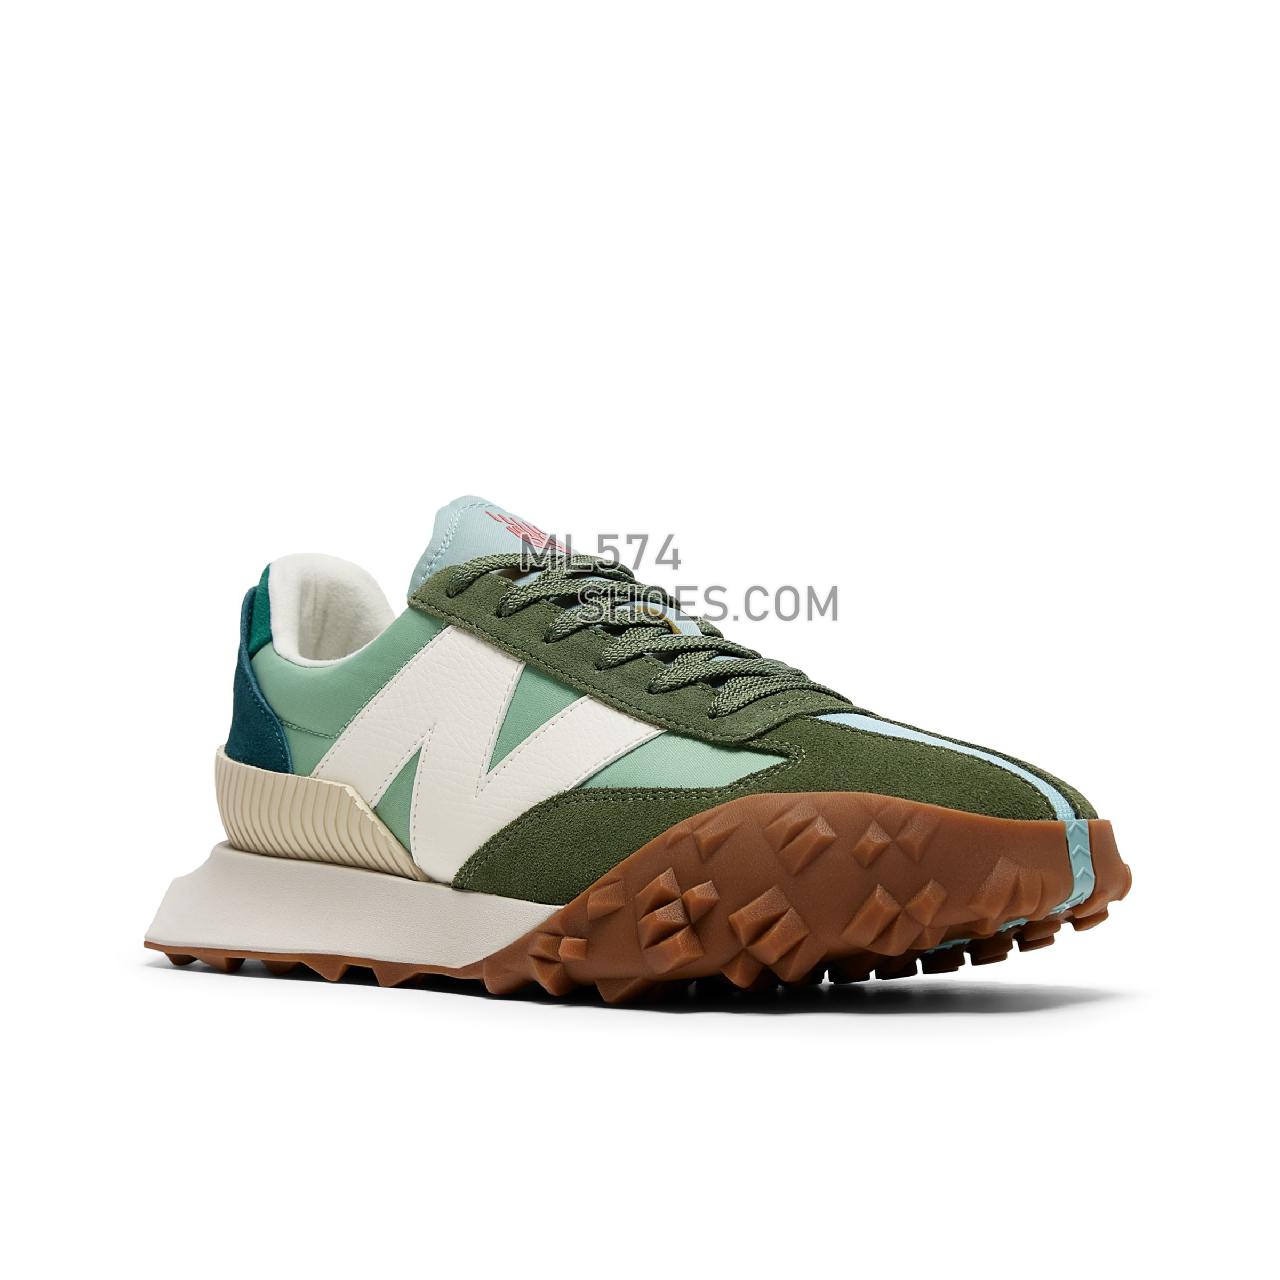 New Balance XC-72 - Unisex Men's Women's Sport Style Sneakers - Dry Sage with Norway Spruce - UXC72OU1